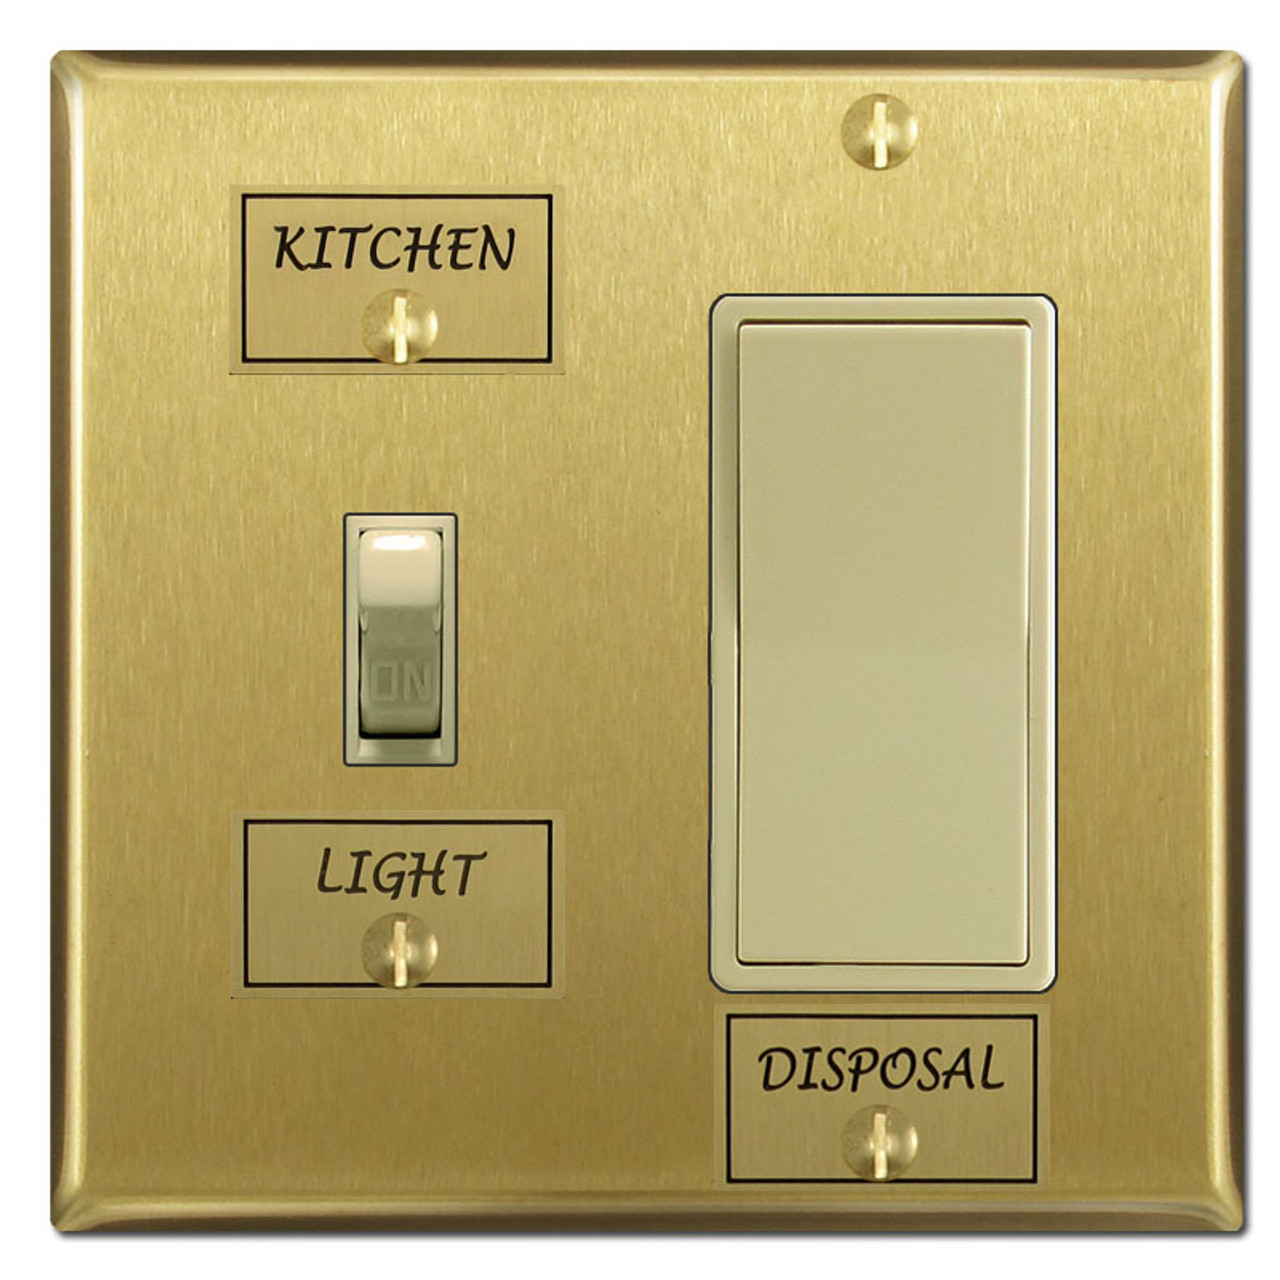 https://cdn11.bigcommerce.com/s-wlejmk/images/stencil/1280x1280/products/1185/23543/brass-switch-identifier-name-tags-for-switchplates-labels-b__47046.1533836605.jpg?c=2